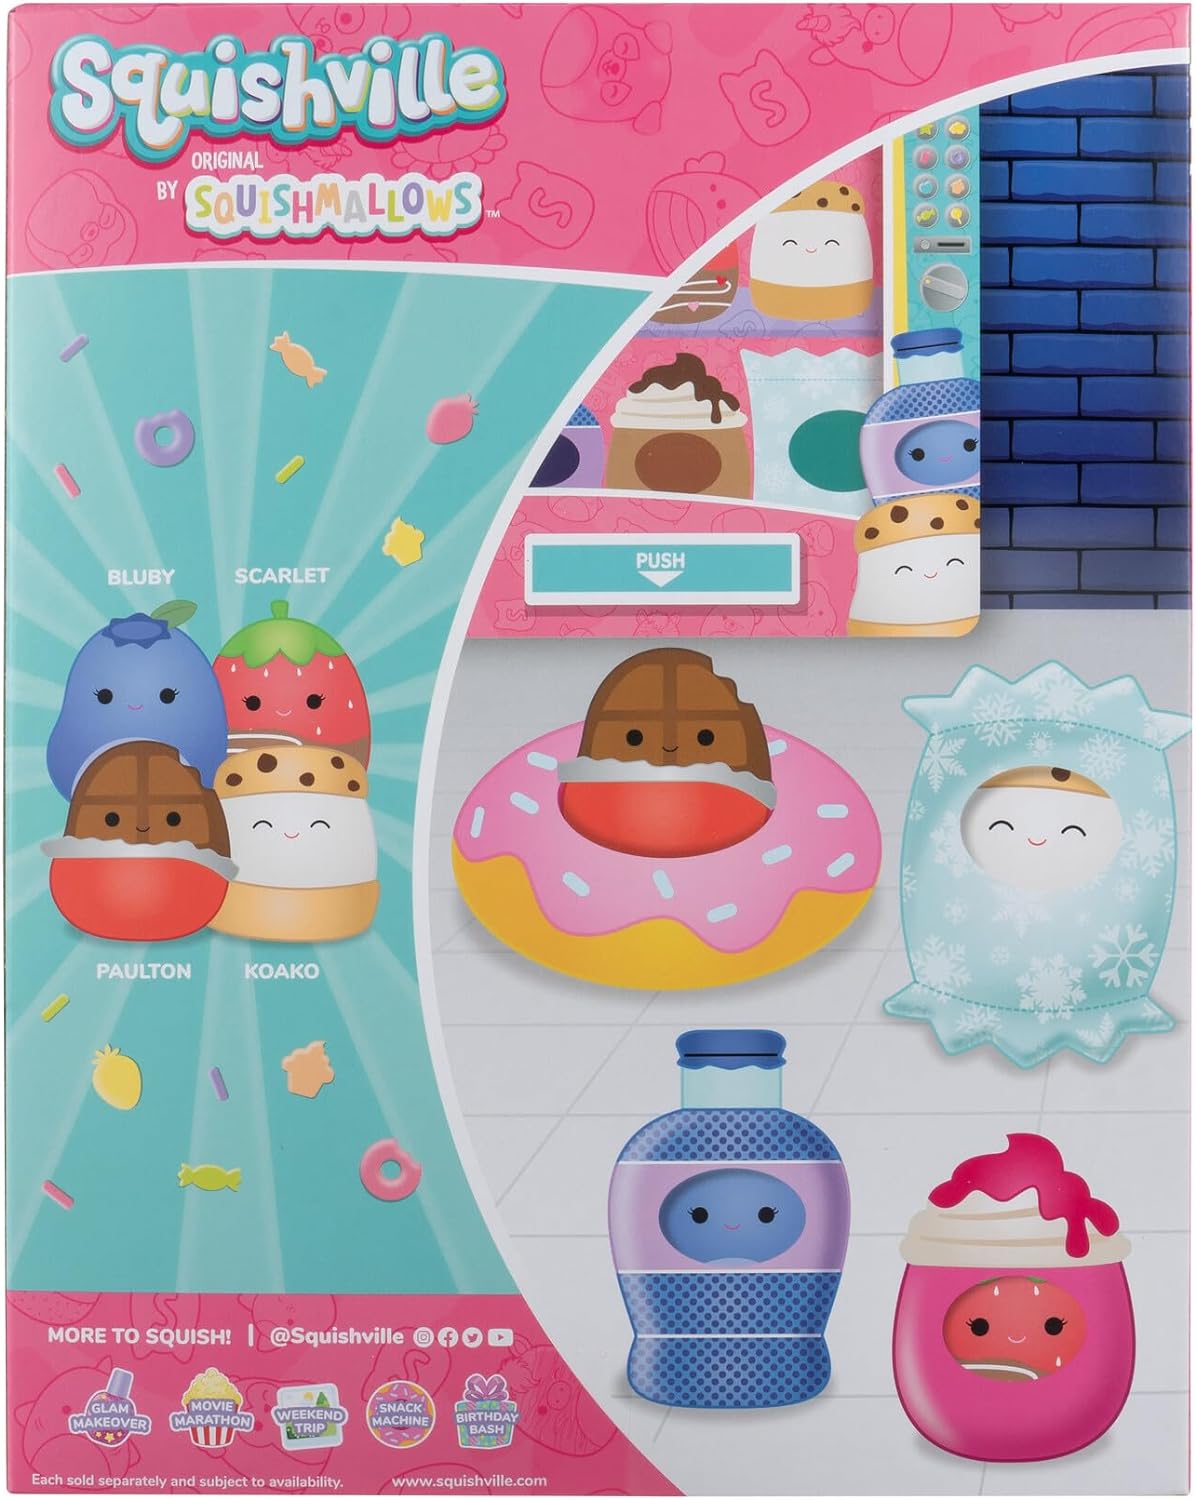 Squishville Squishmallows SNACK MACHINE Accessory Pack Soft Plush Toy